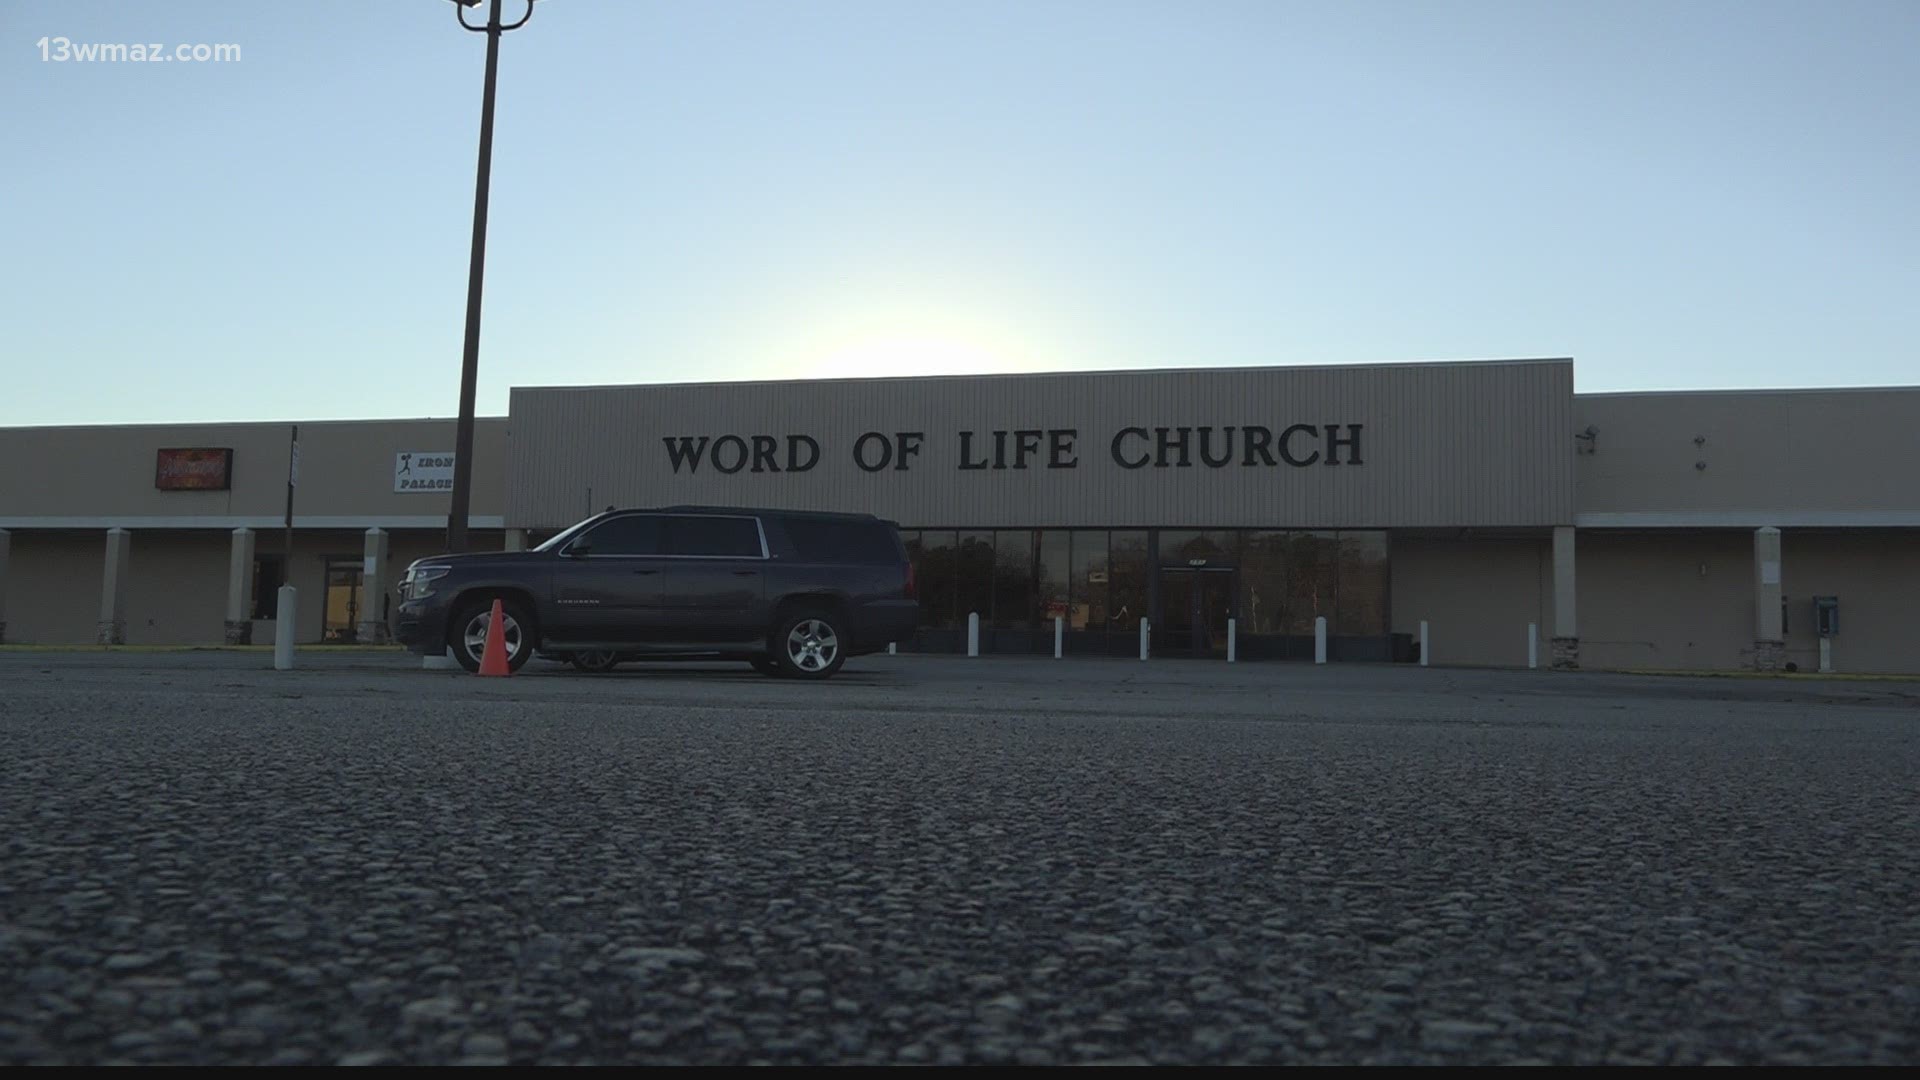 The newest mass vaccination site coming to Central Georgia is in Washington County at the Word of Life Church in Sandersville.